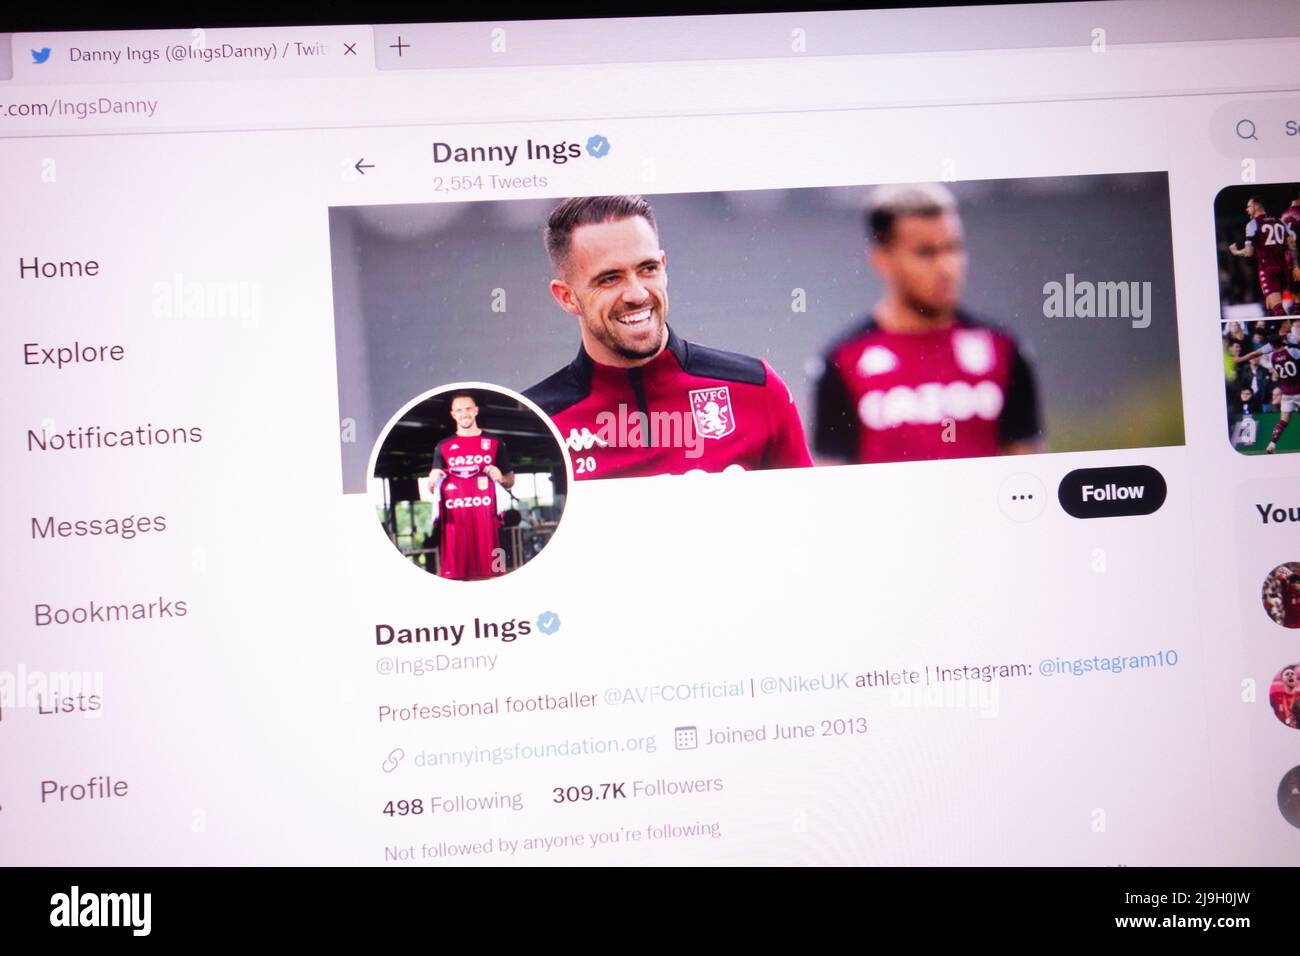 KONSKIE, POLAND - May 21, 2022: Danny Ings official Twitter account displayed on laptop screen Stock Photo